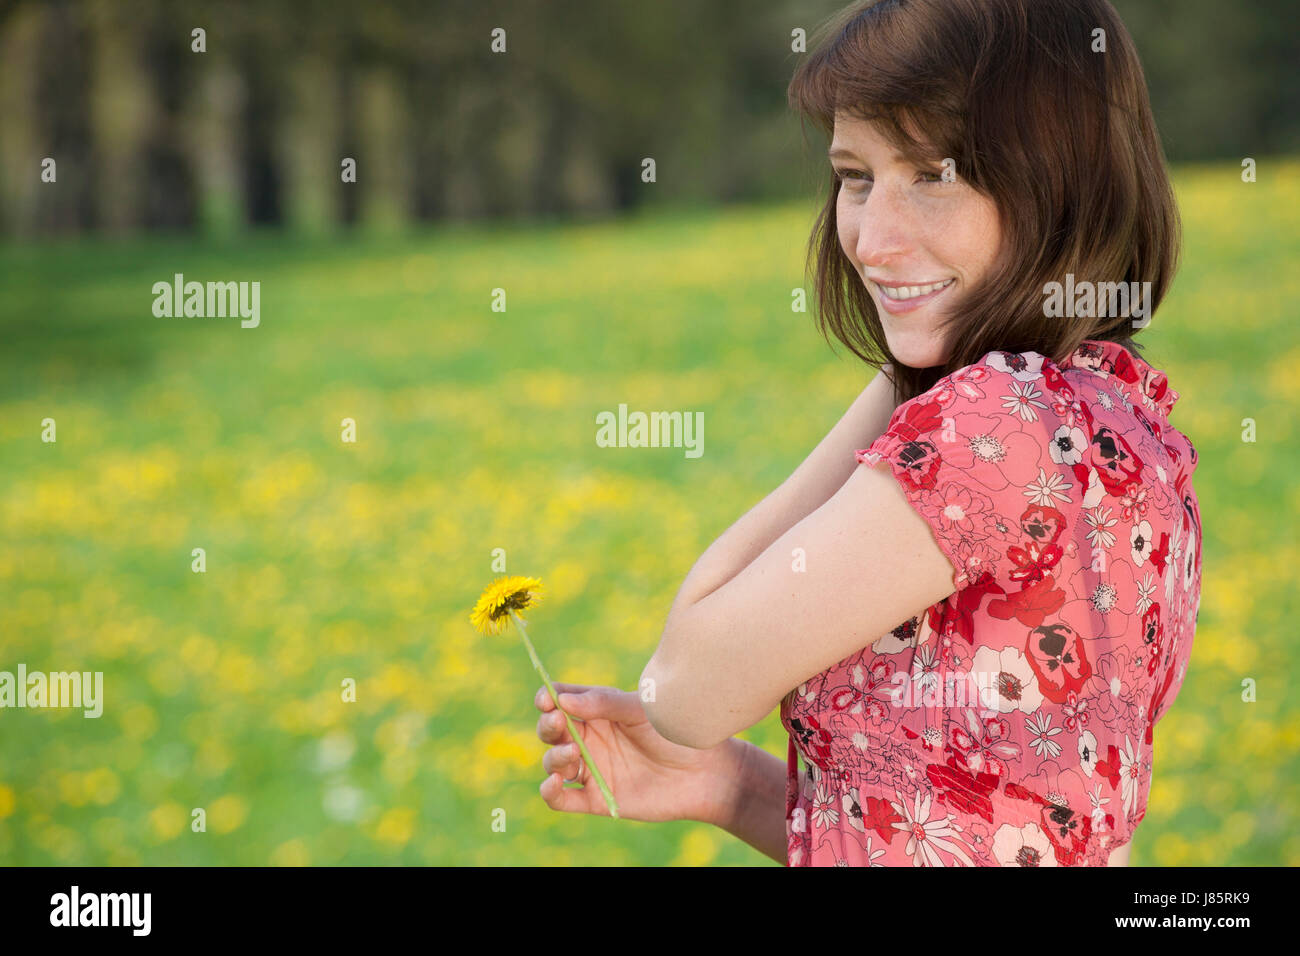 woman portrait spring flower meadow young younger meadow girl girls woman laugh Stock Photo